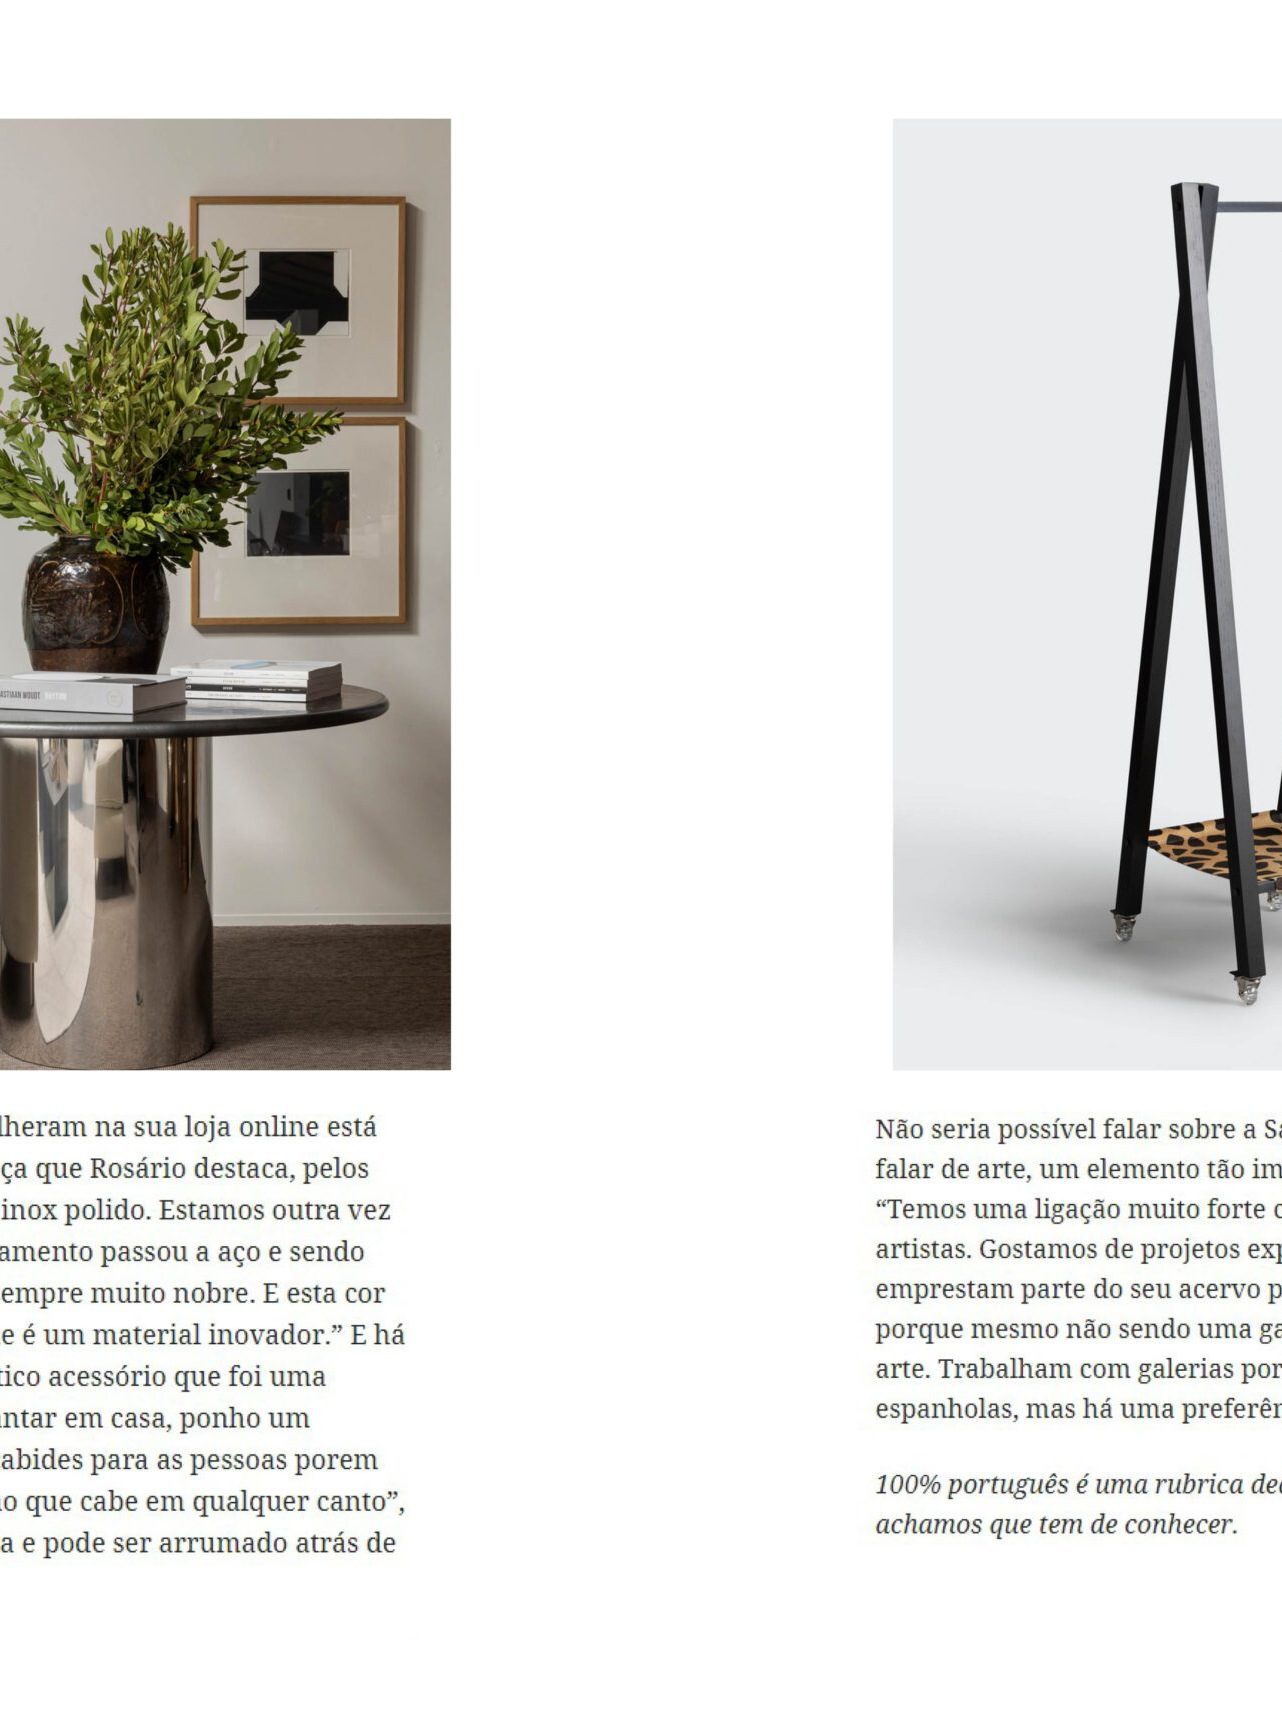 SAV observador december 2022 review design architecture project luxury interview showroom deco exclusive environments project yellow online shop partners rosário tello carmo aranha 40 pieces furniture artful trays travertine versatility personality flexible charriot pitch black steel coffee table